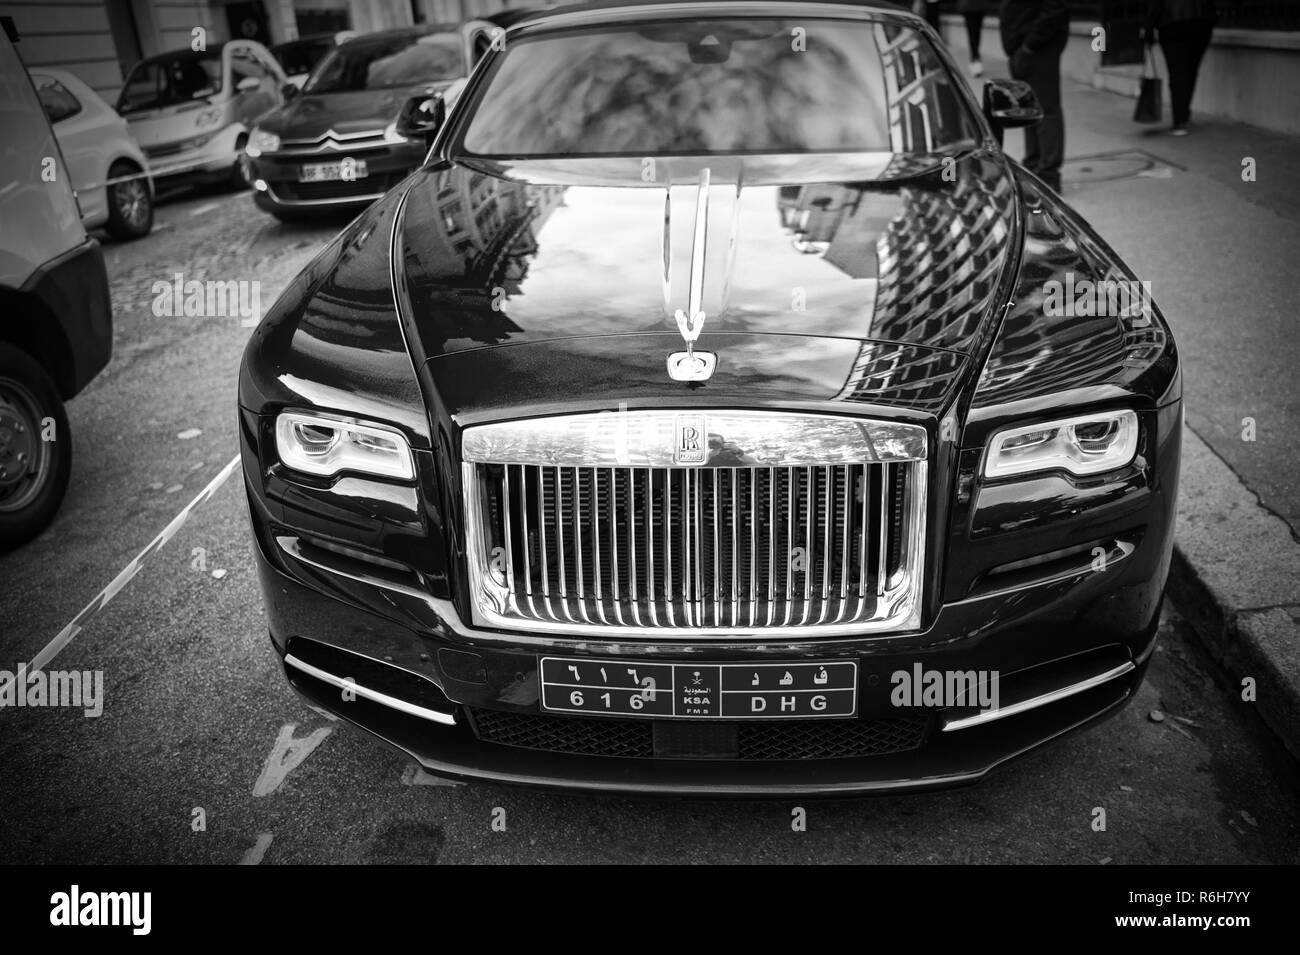 Paris, France - September 26, 23, 2017: luxury Supercar rolls royce rolls-royce ghost color parked on the street in Paris. rolls royce rolls-royce is famous expensive automobile brand car Stock Photo